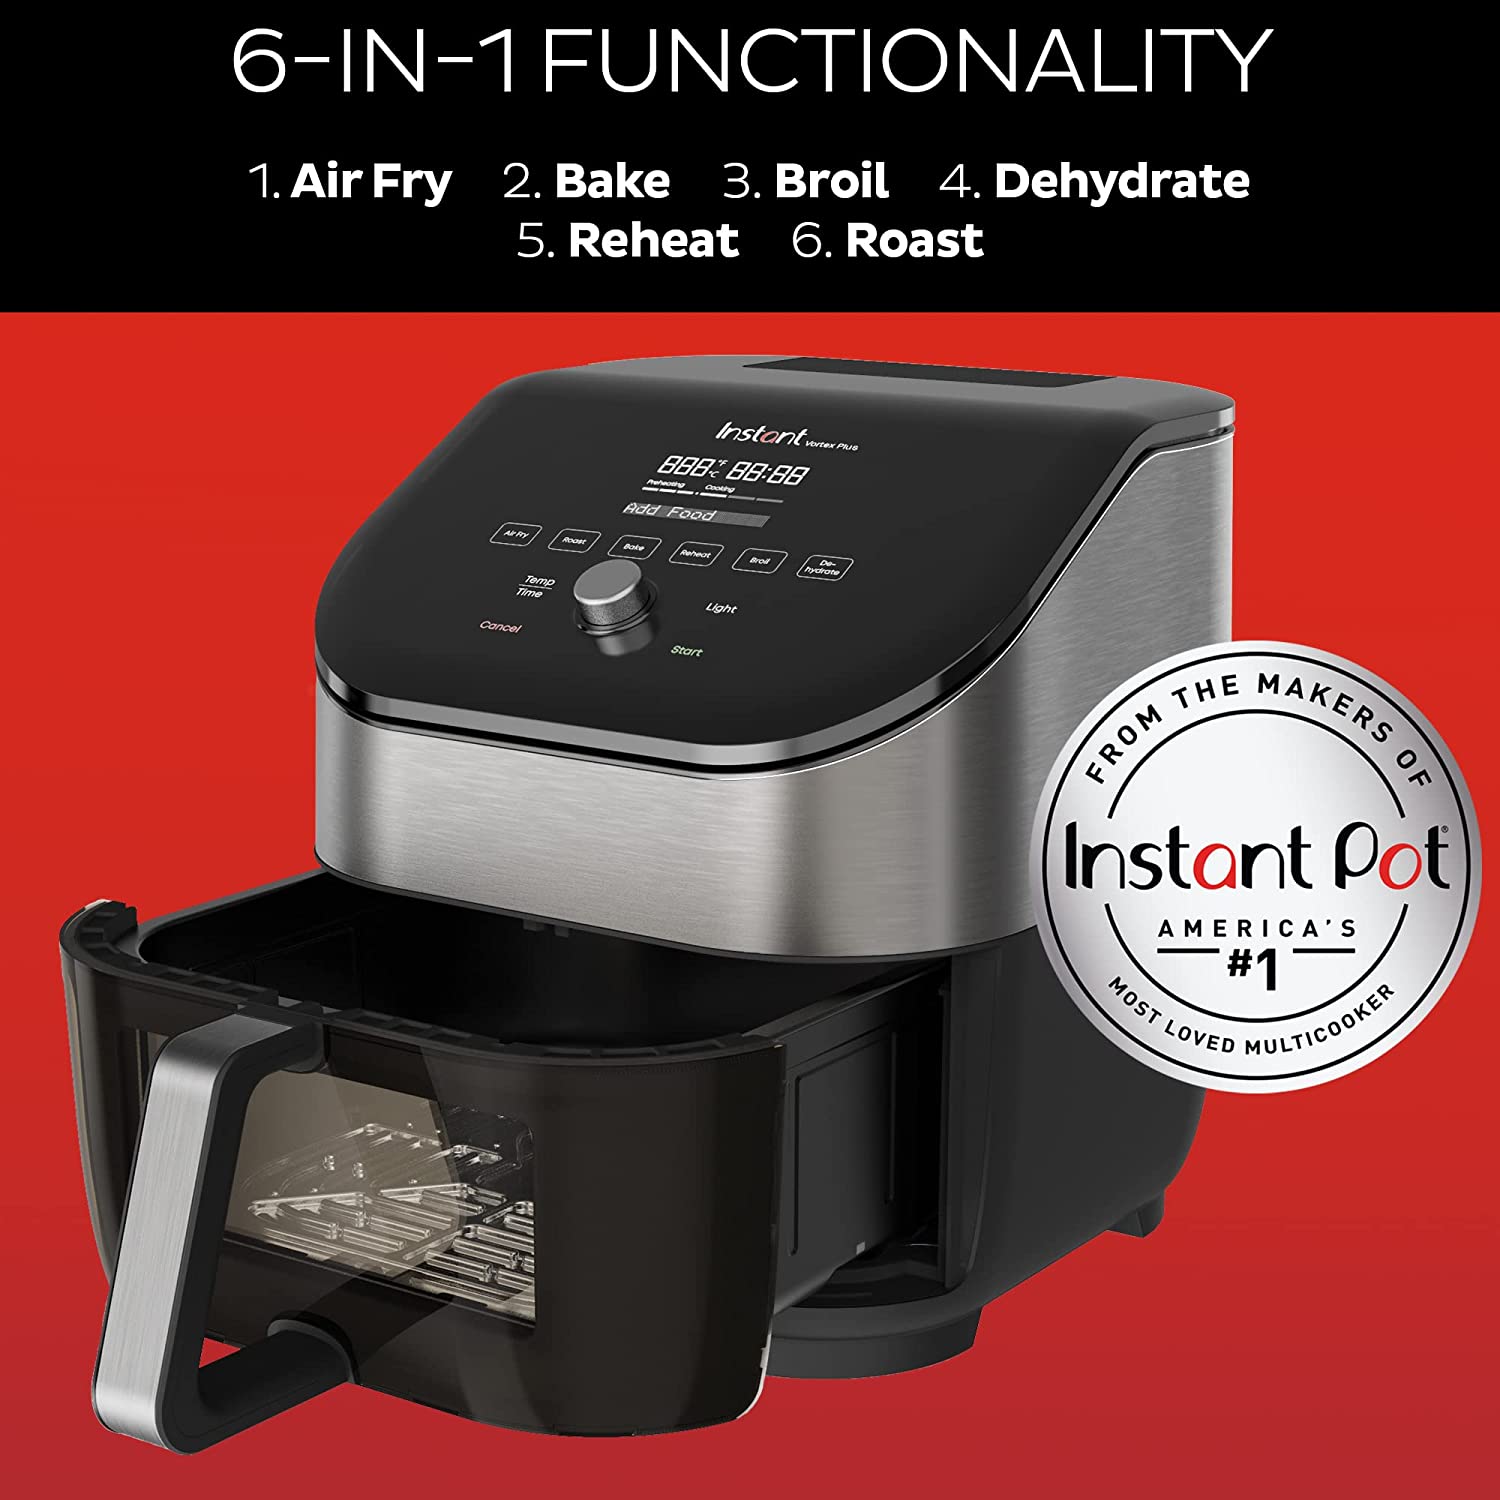 https://discounttoday.net/wp-content/uploads/2023/01/Instant-Vortex-Plus-6-Quart-Air-Fryer-Oven-From-the-Makers-of-Instant-Pot-with-Odor-Erase-Technology-ClearCook-Cooking-Window-App-with-over-100-Recipes-Single-Basket-Stainless-Steel2.jpg